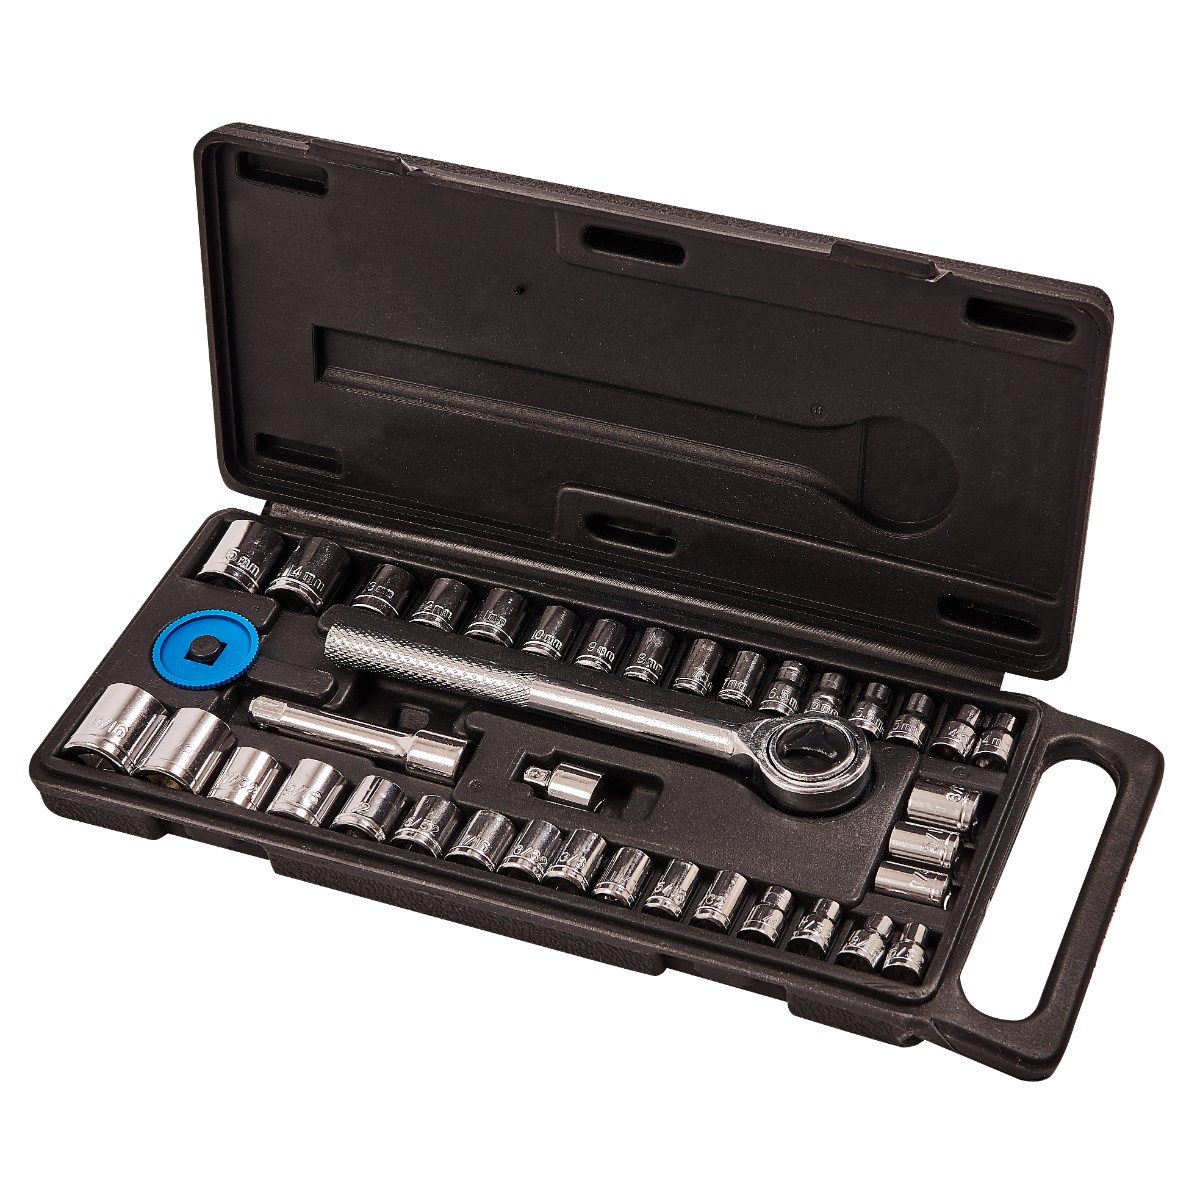 I0150 Details about   52PC SOCKET WRENCH SET AMTECH 1/4'' 3/8'' & 1/2'' QUALITY STORAGE